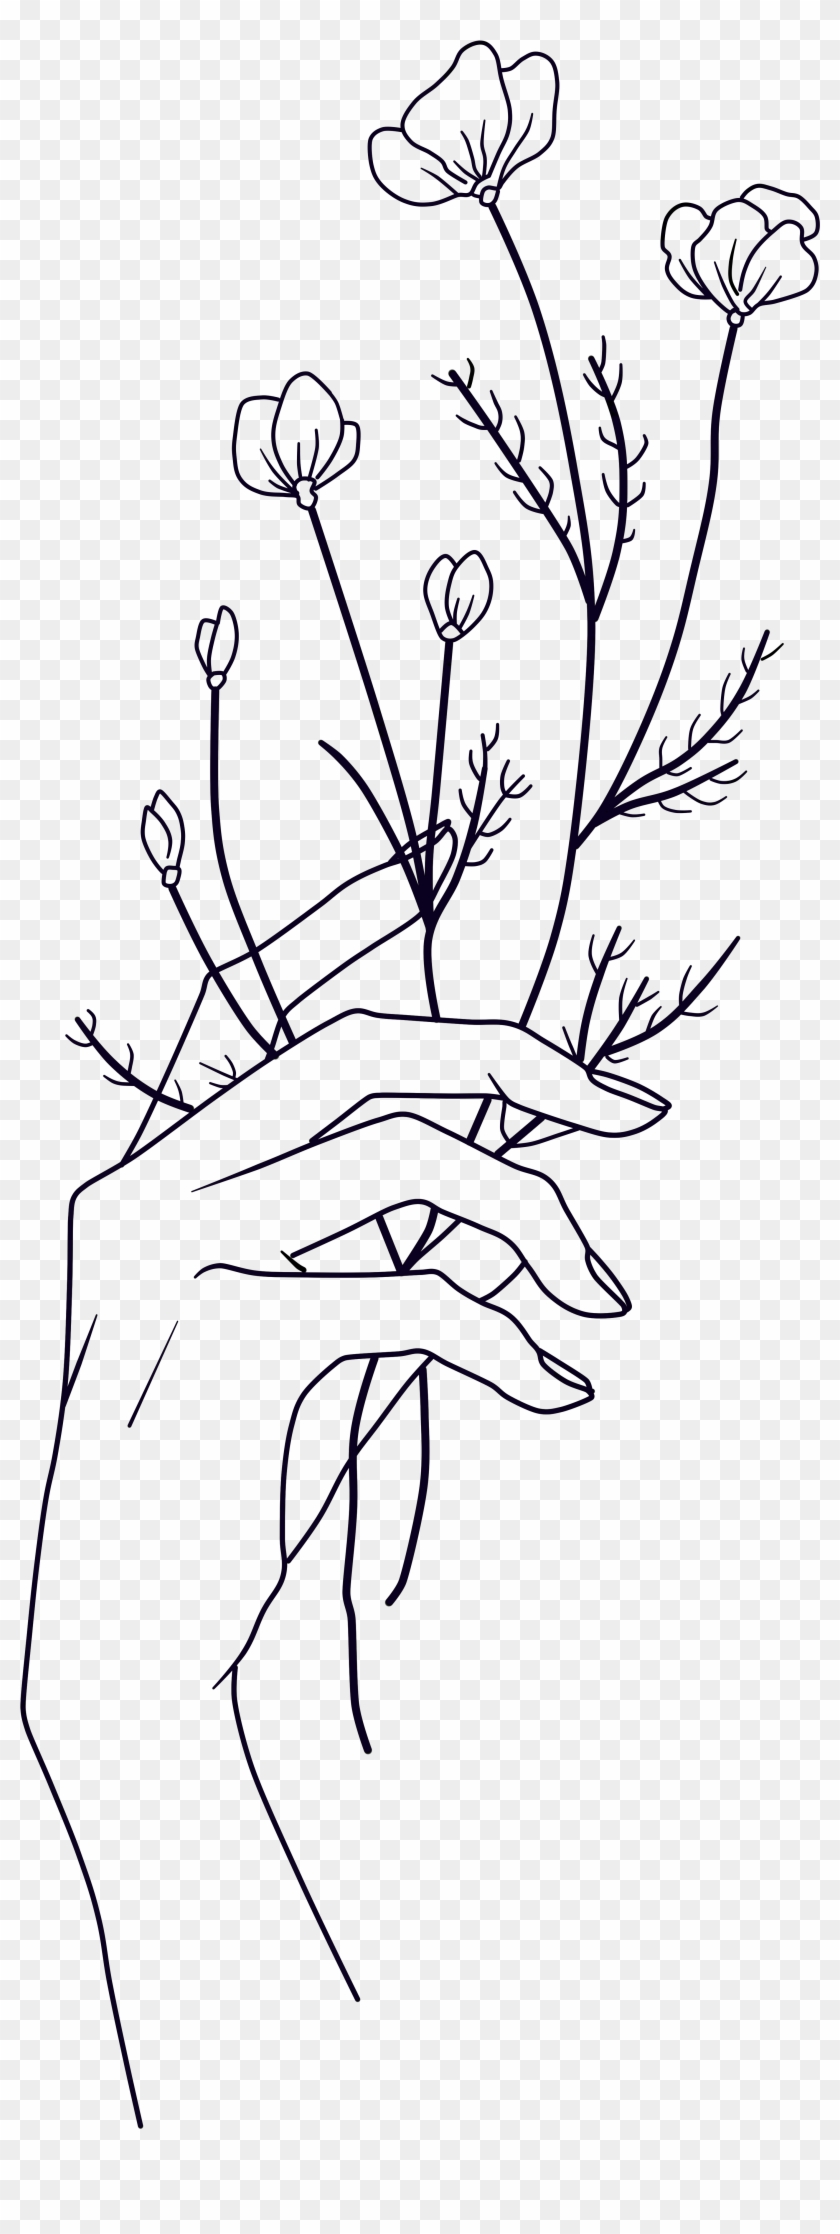 Hand Holding A Flower Drawing Clipart 2667835 Pikpng